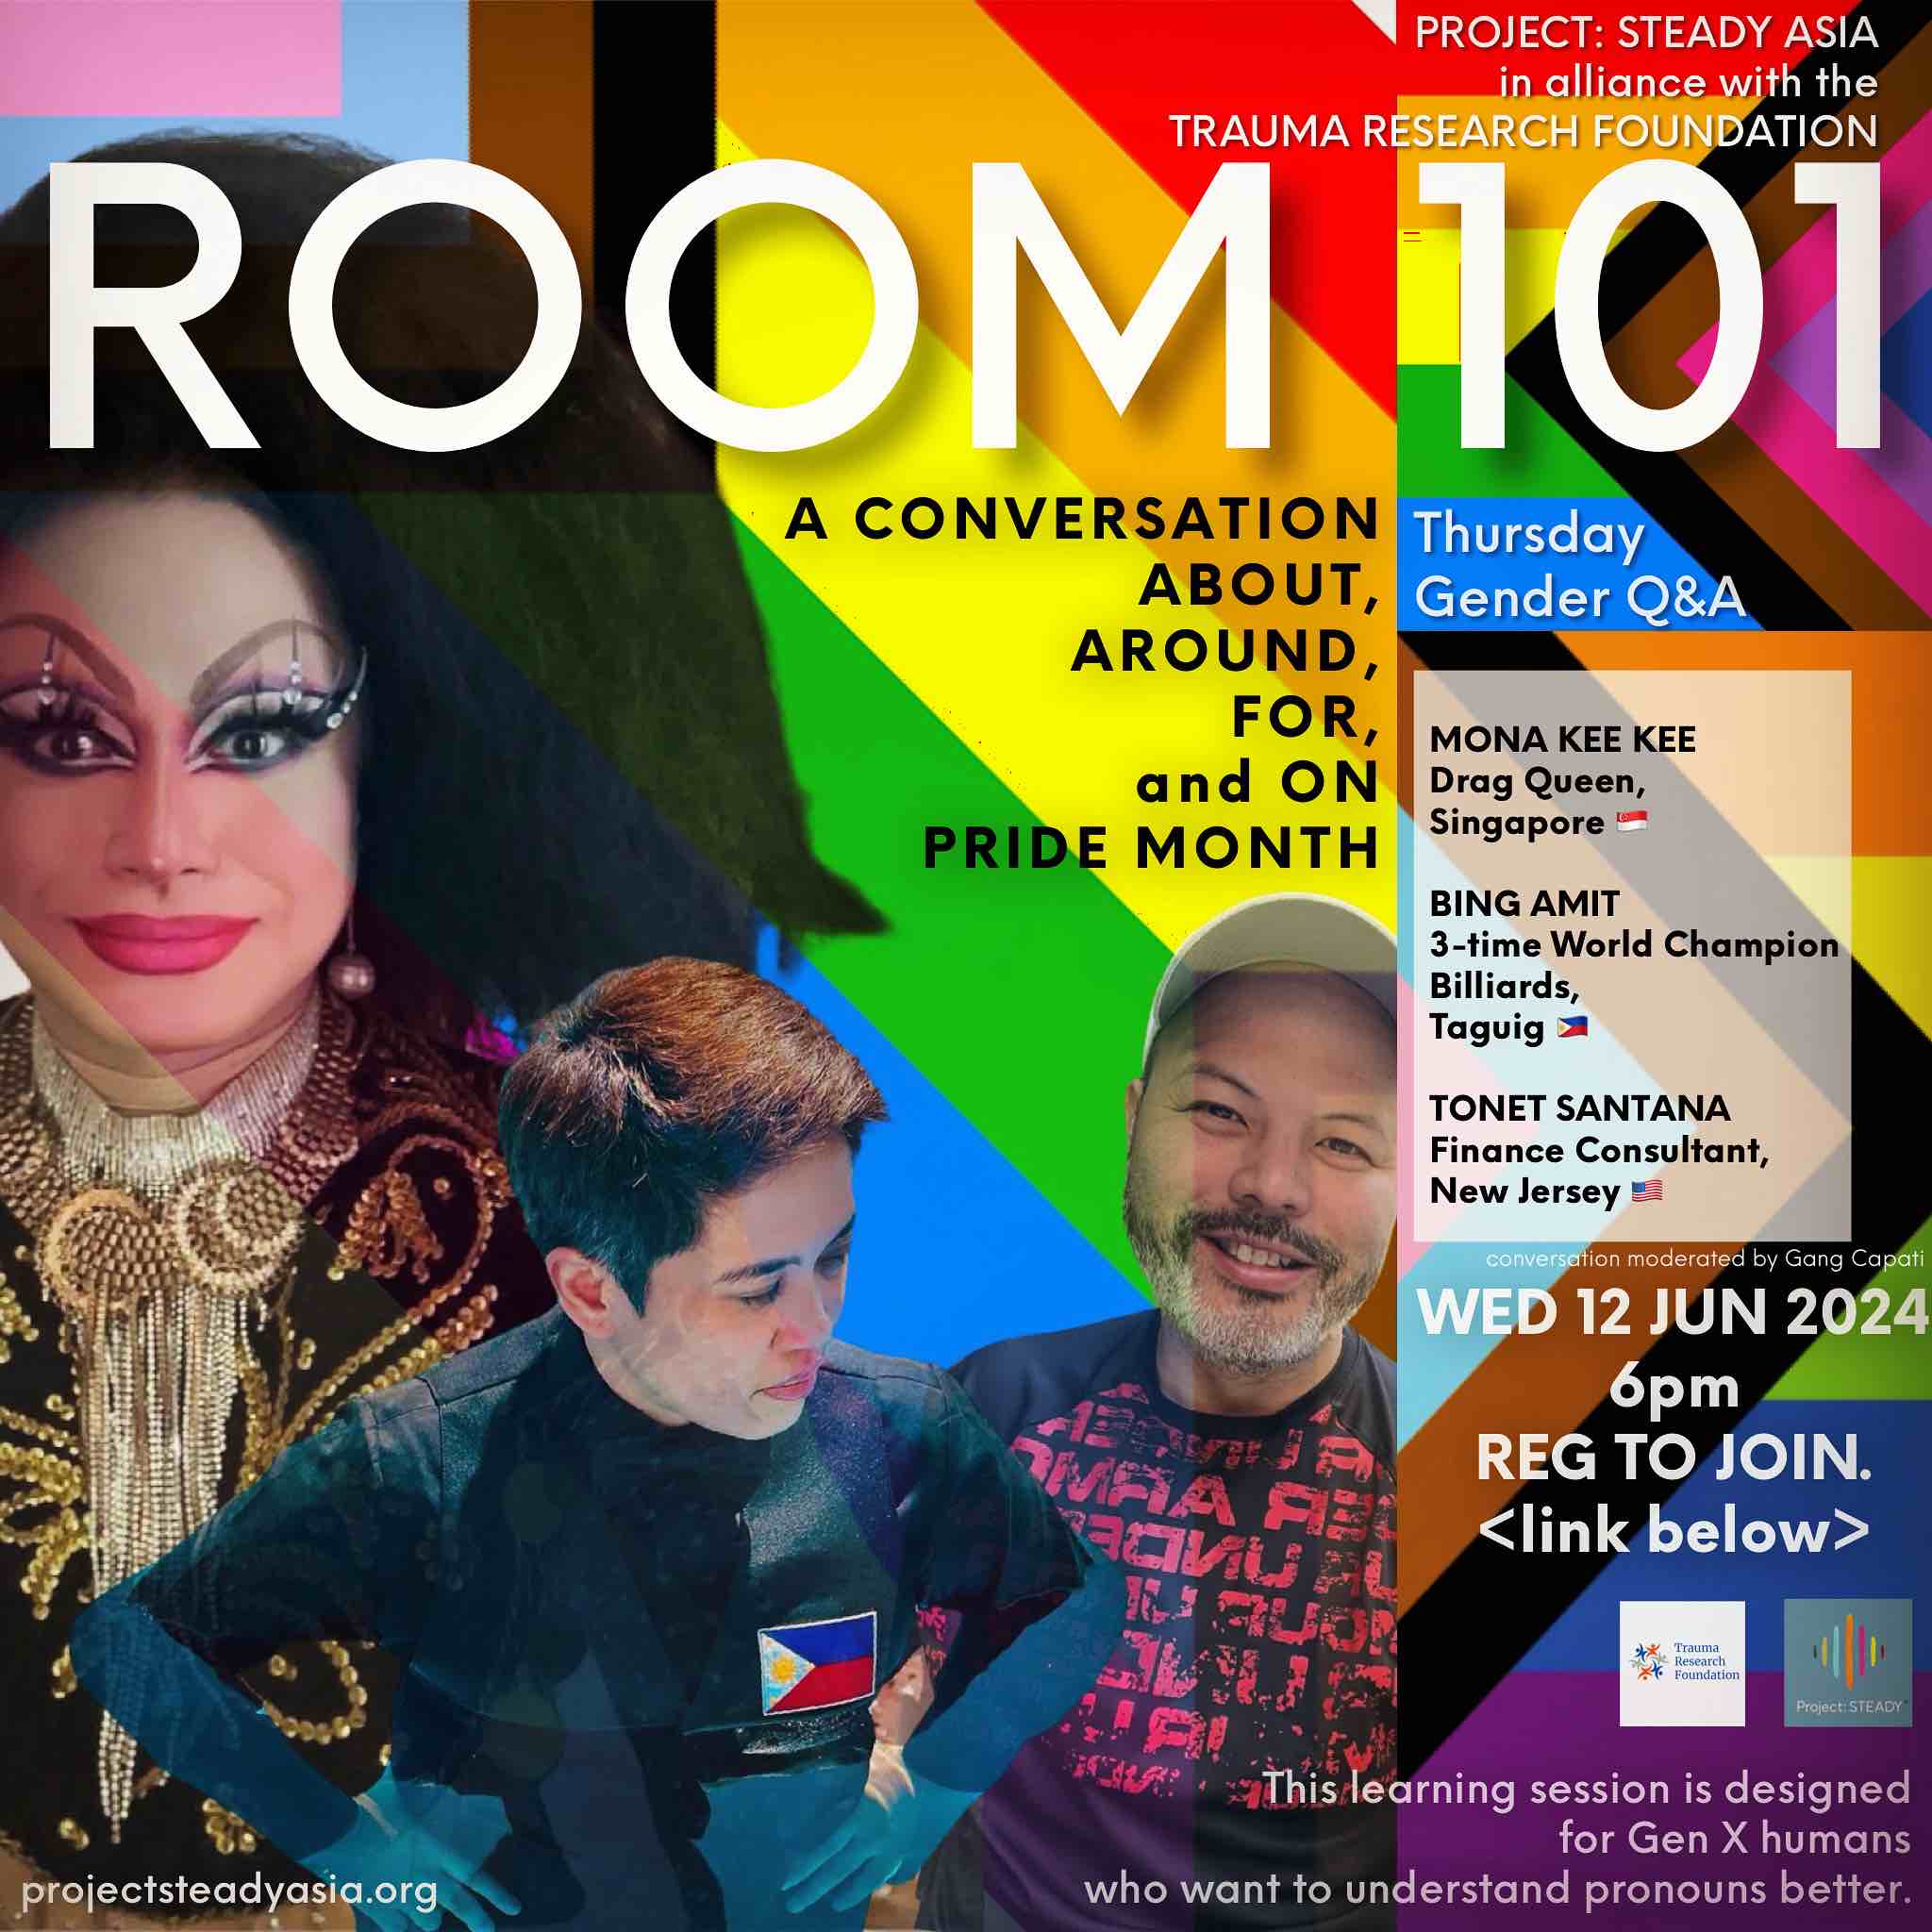 ROOM 101 is a mental health learning series from Project: Steady where we gather to ask our questions on topics we might have had very little chances to discuss in our own spaces.